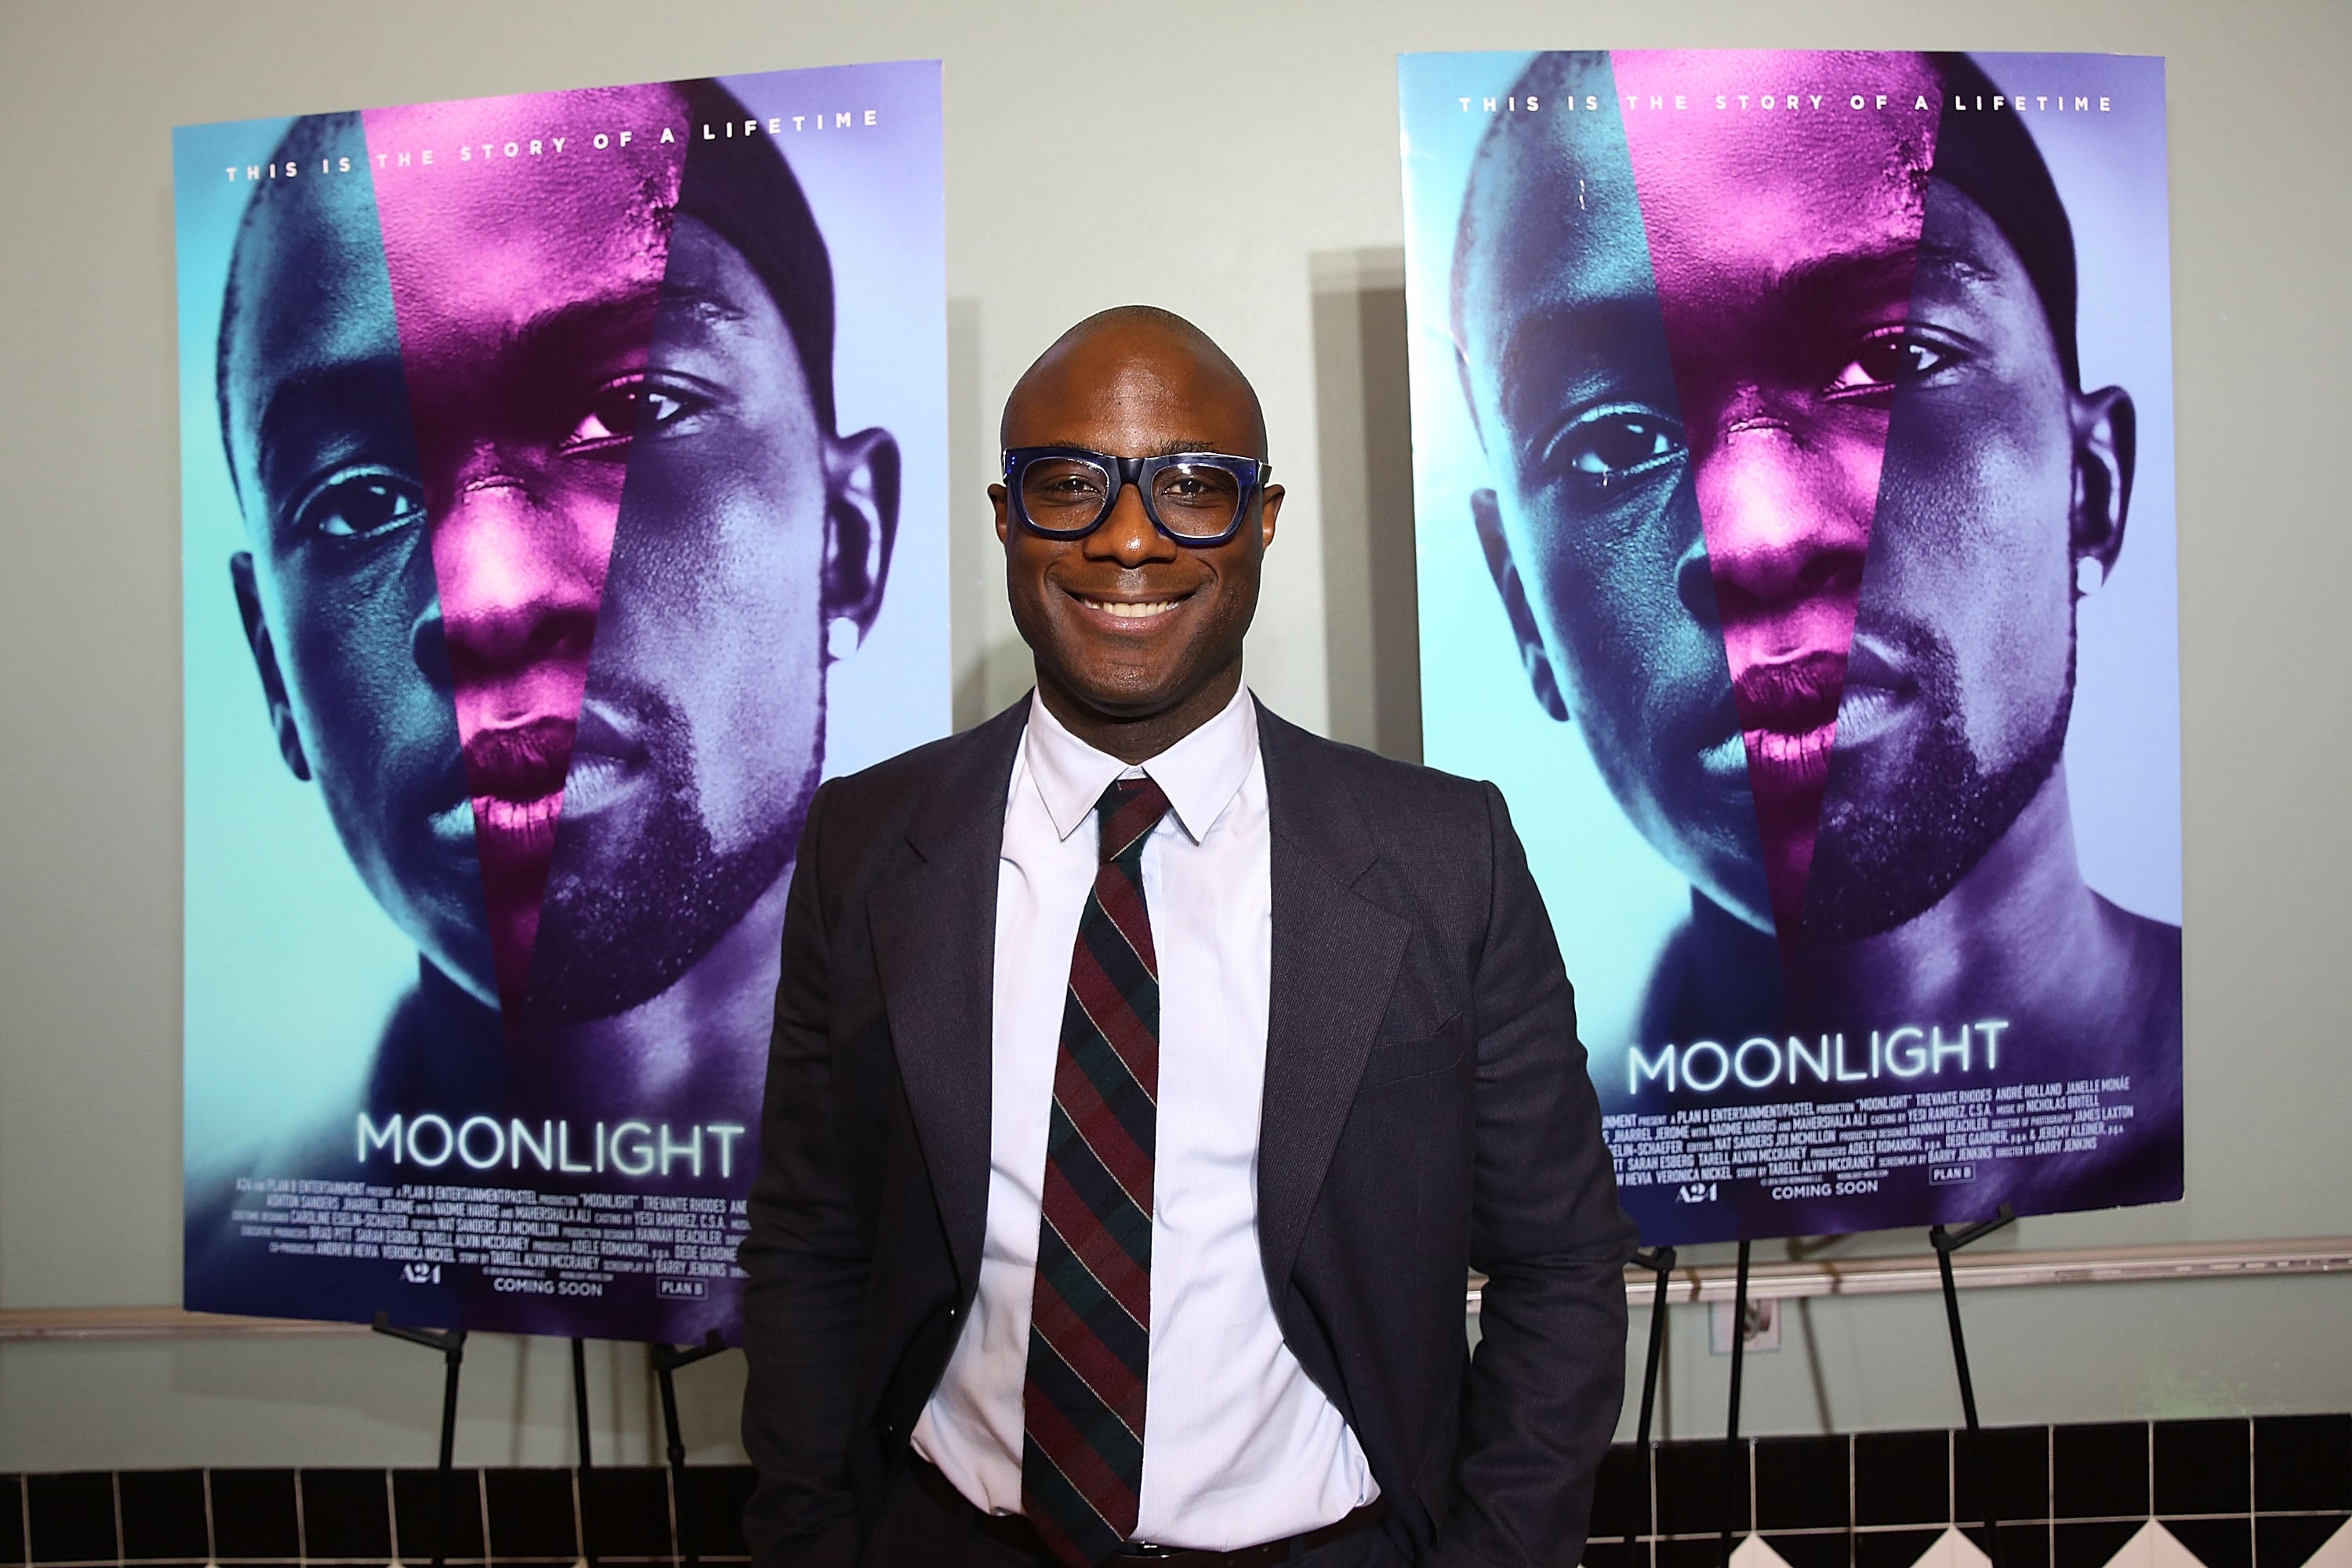 You Have To Hear 'Moonlight' Director Barry Jenkins' Powerful Speech After His Historic National Board Of Review Win
